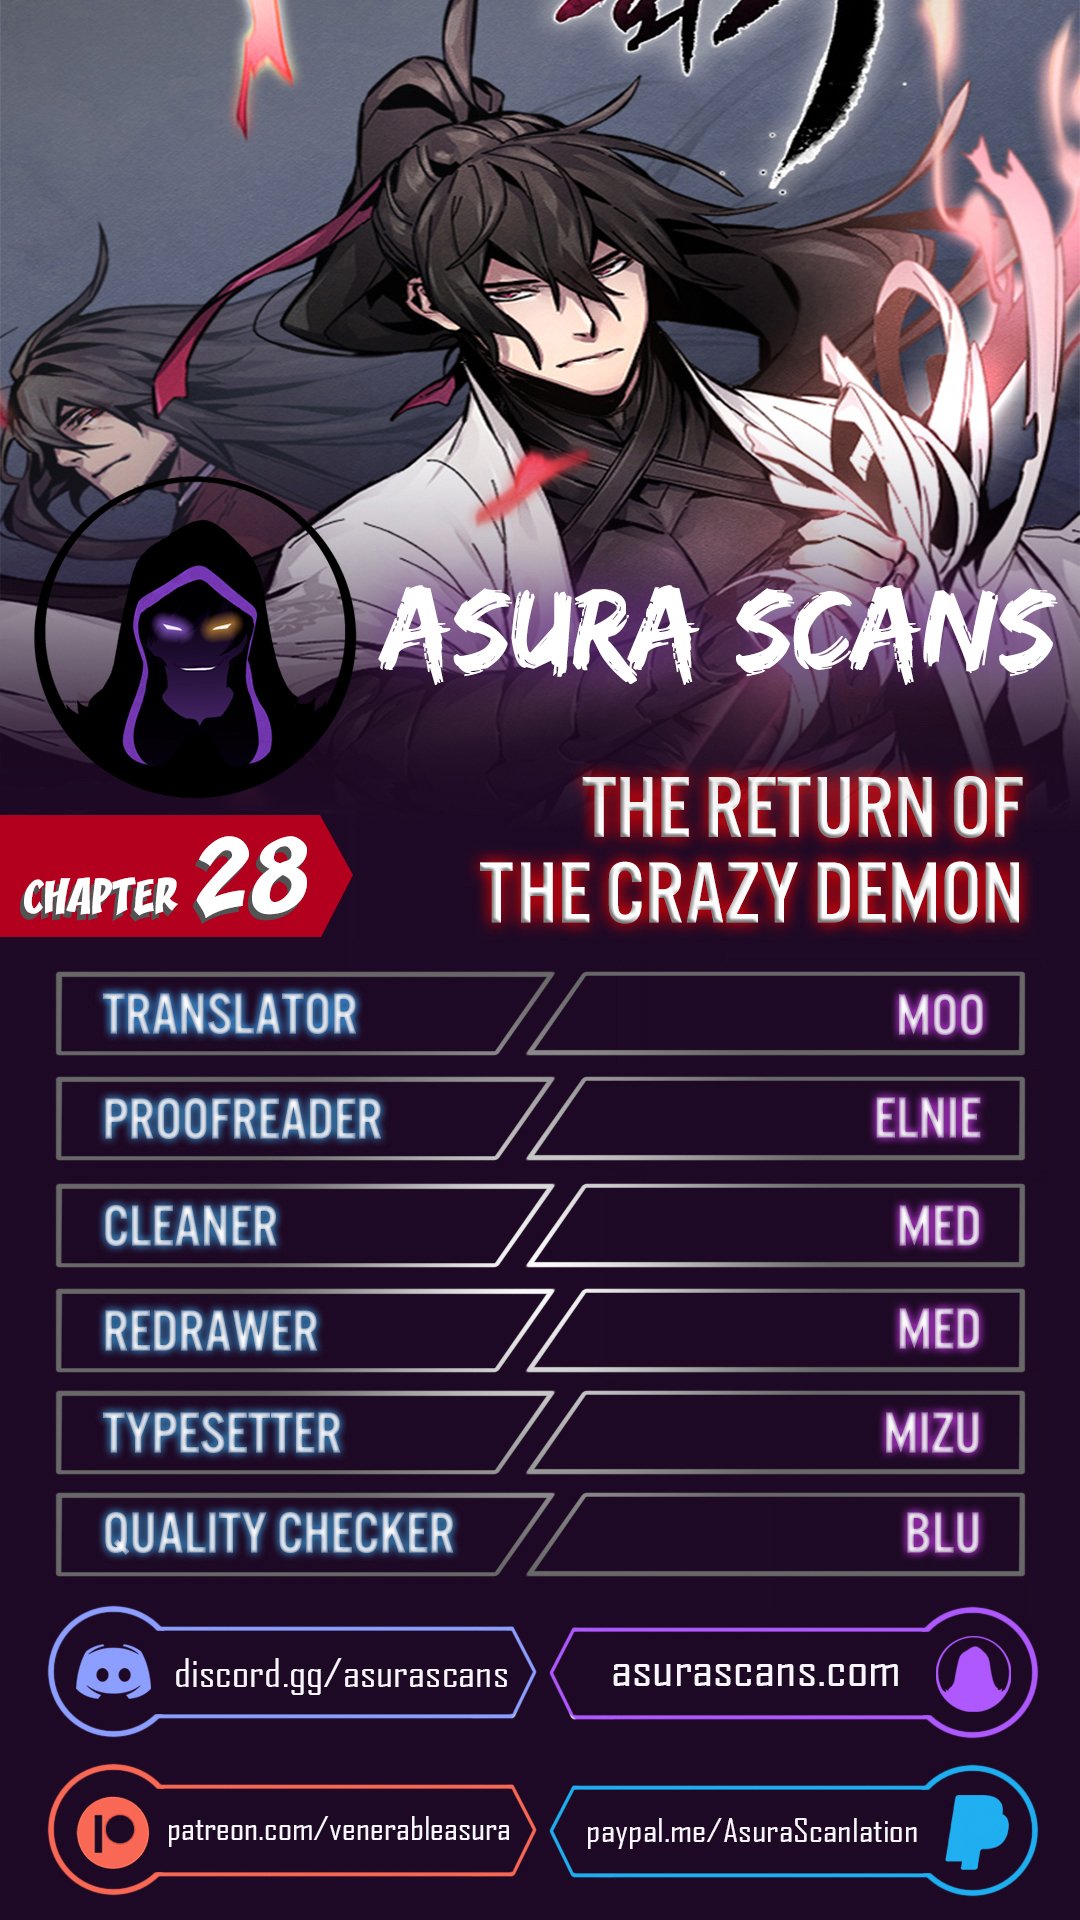 The Return of the Crazy Demon - Chapter 18569 - Image 1